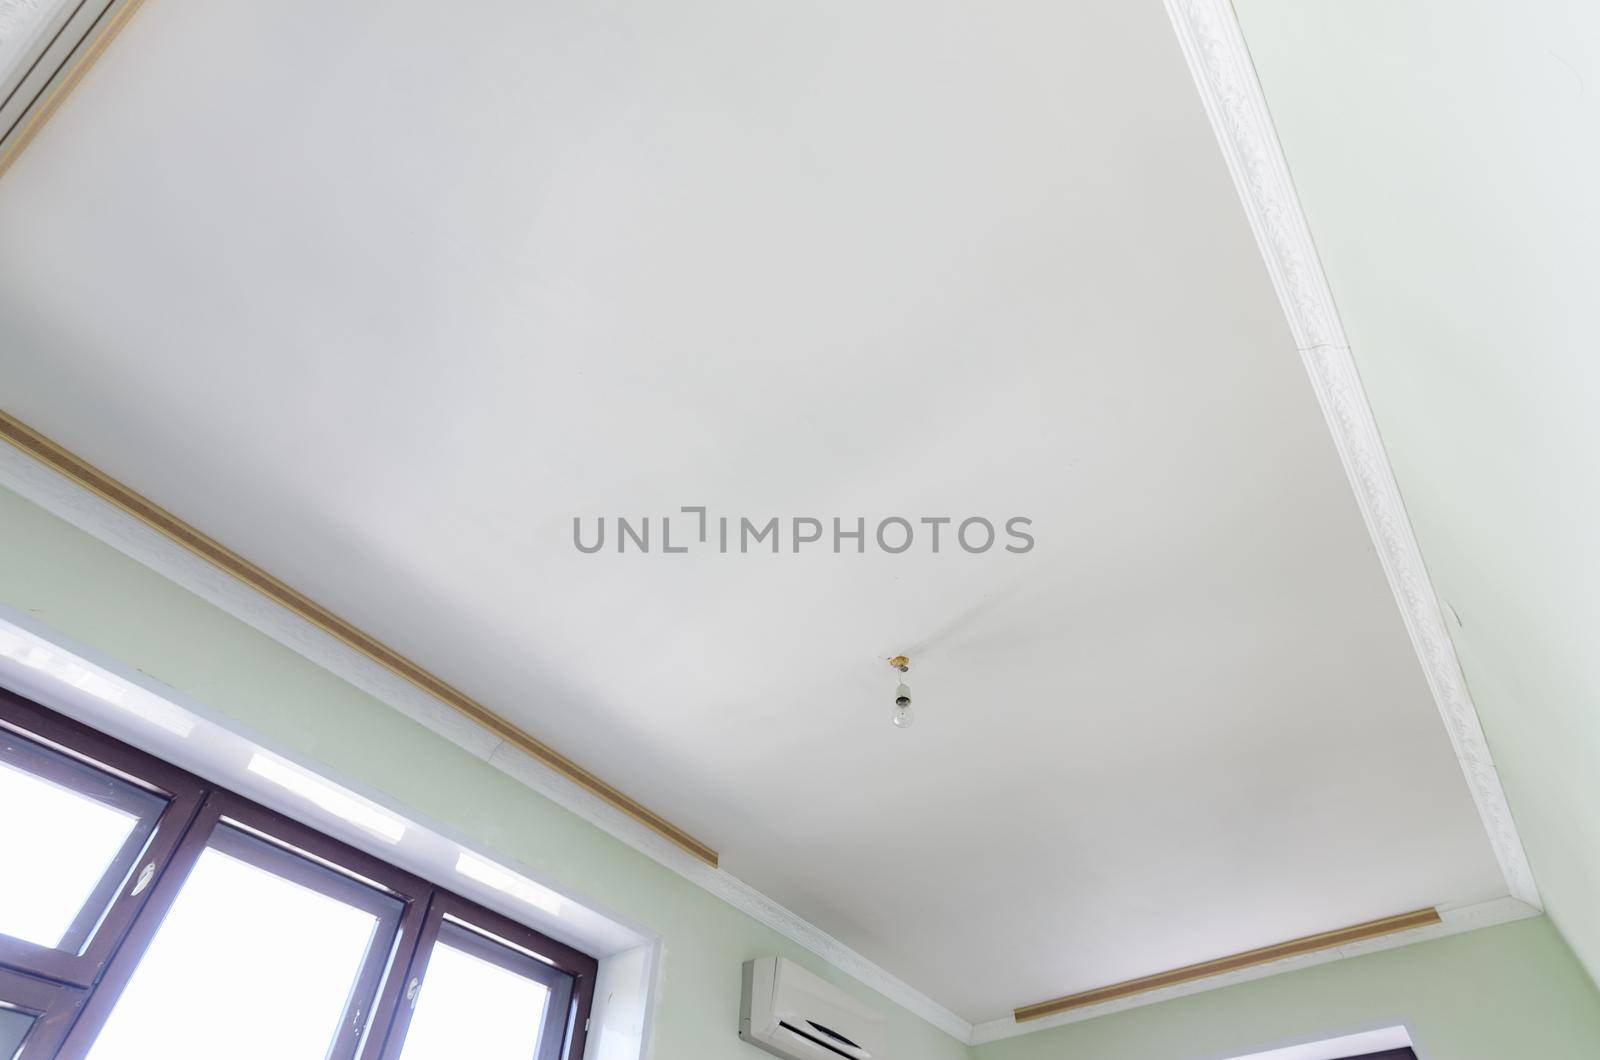 Plastered white ceiling in the room, a temporary light bulb hangs on the ceiling a